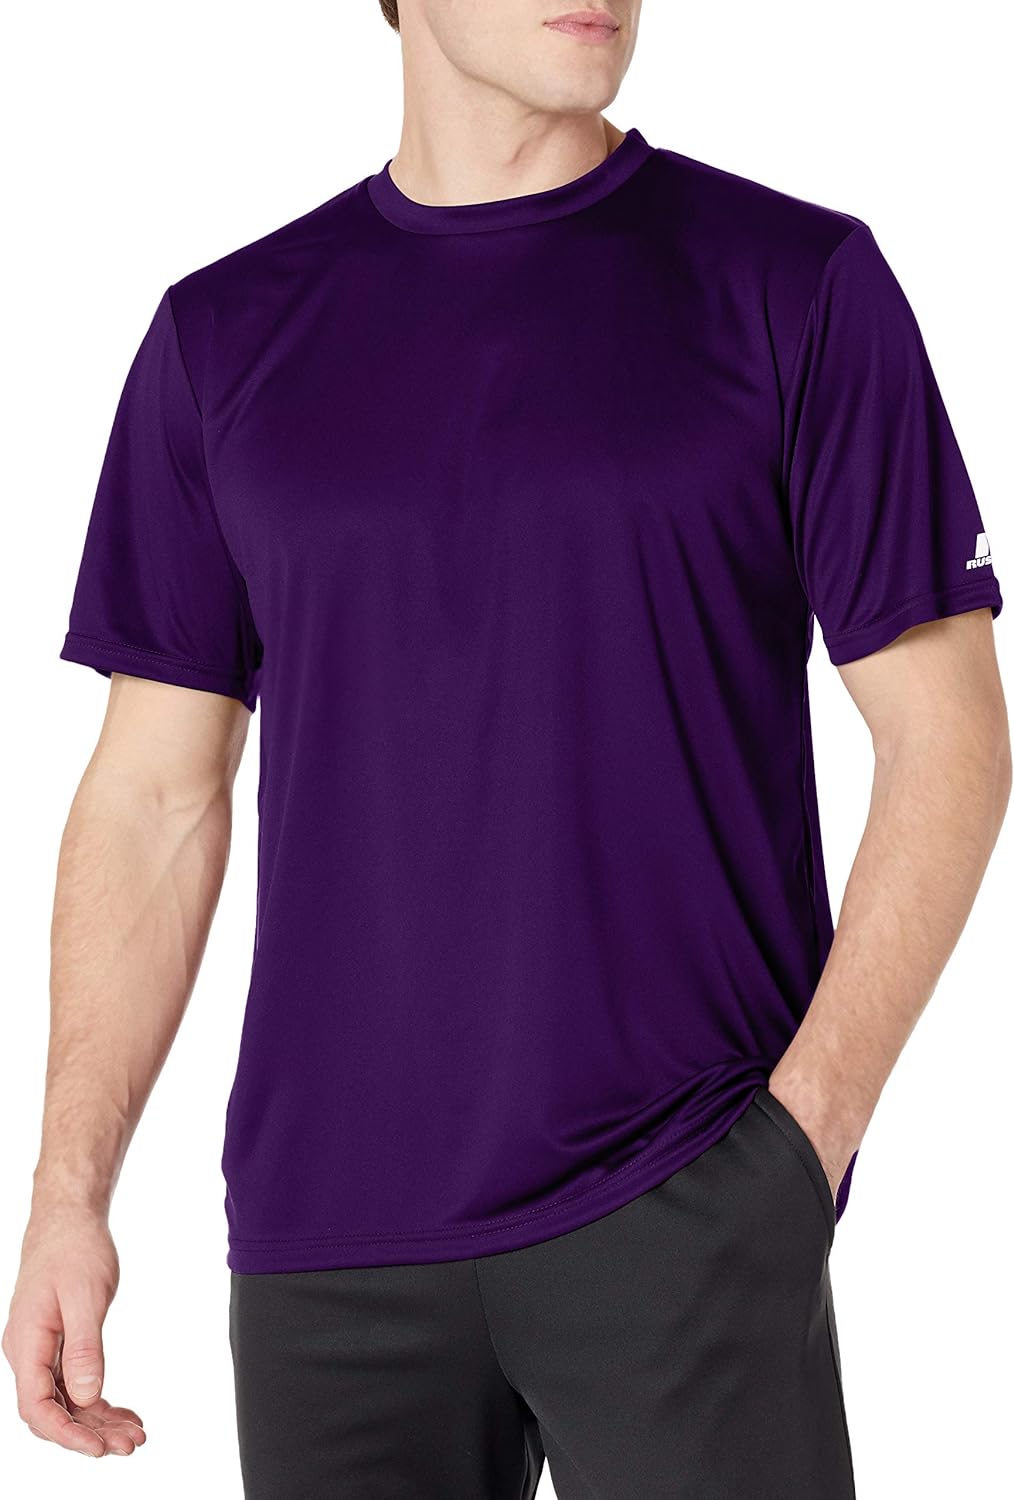 Looking to Buy Russell Athletic Dri Power 360 Shirts. Discover the Top 9 Reasons Why They